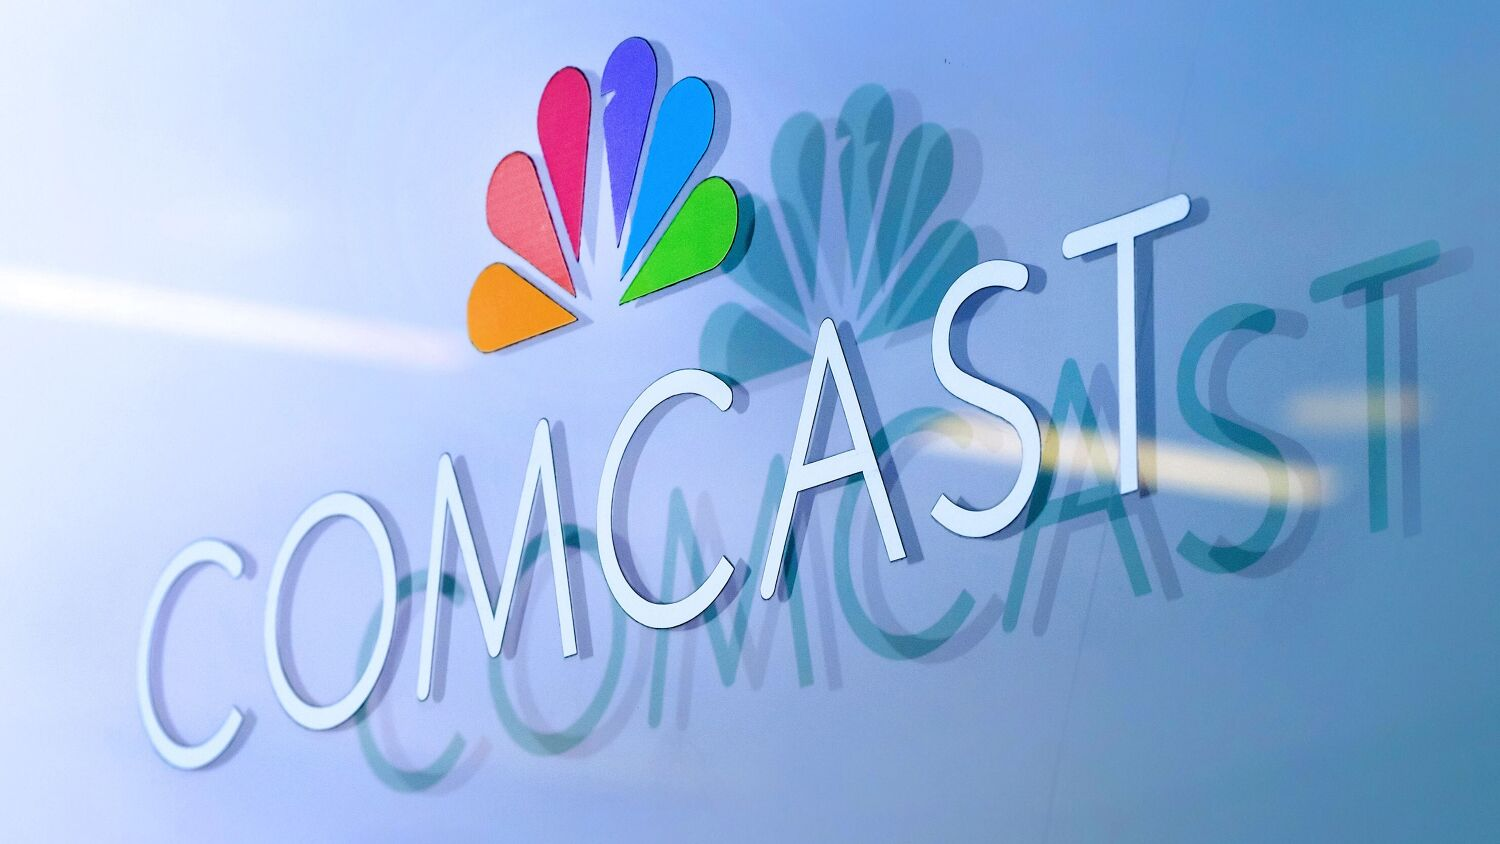 Comcast Awarded More Than $61 Million to Expand Network to Homes and Businesses in Pennsylvania